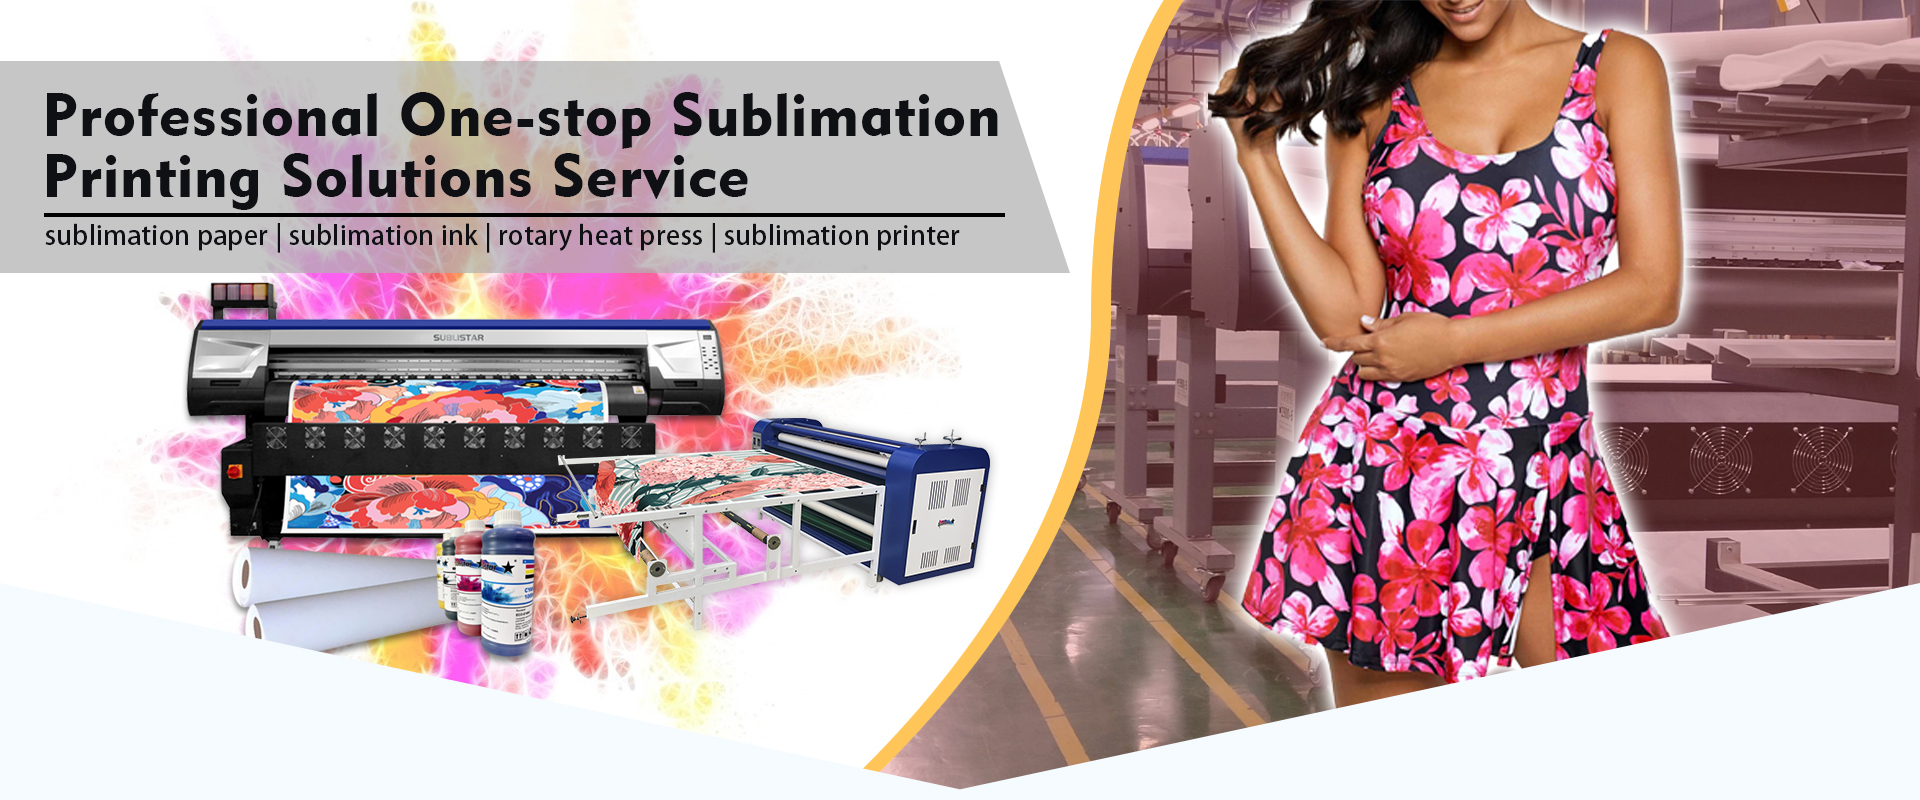 using the sublimation ink